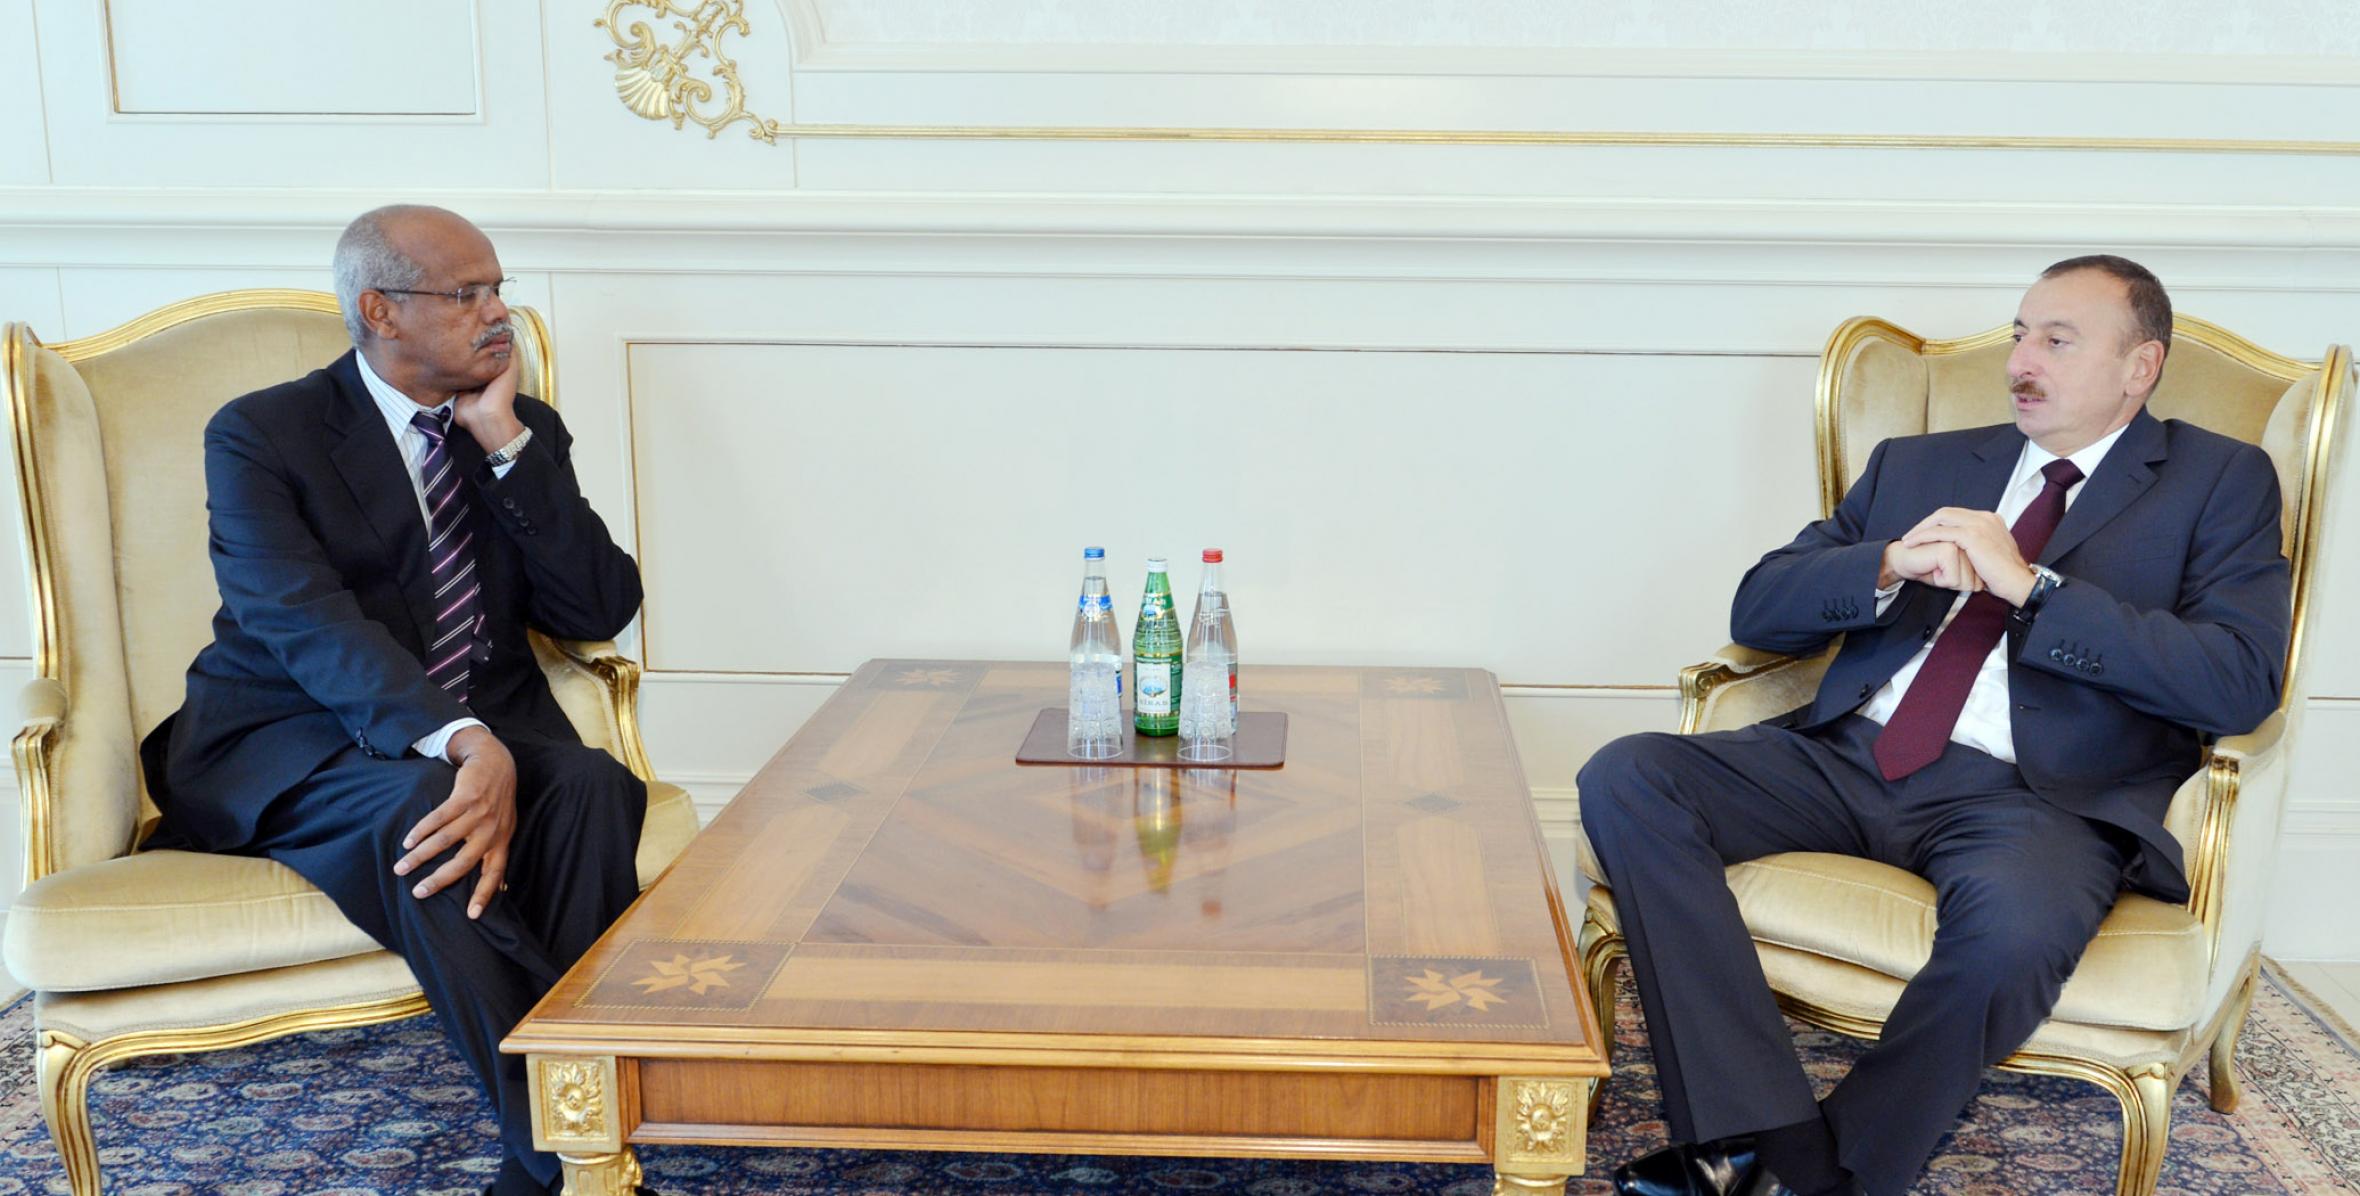 Ilham Aliyev accepted the credentials of the Ambassador of Sudan to Azerbaijan